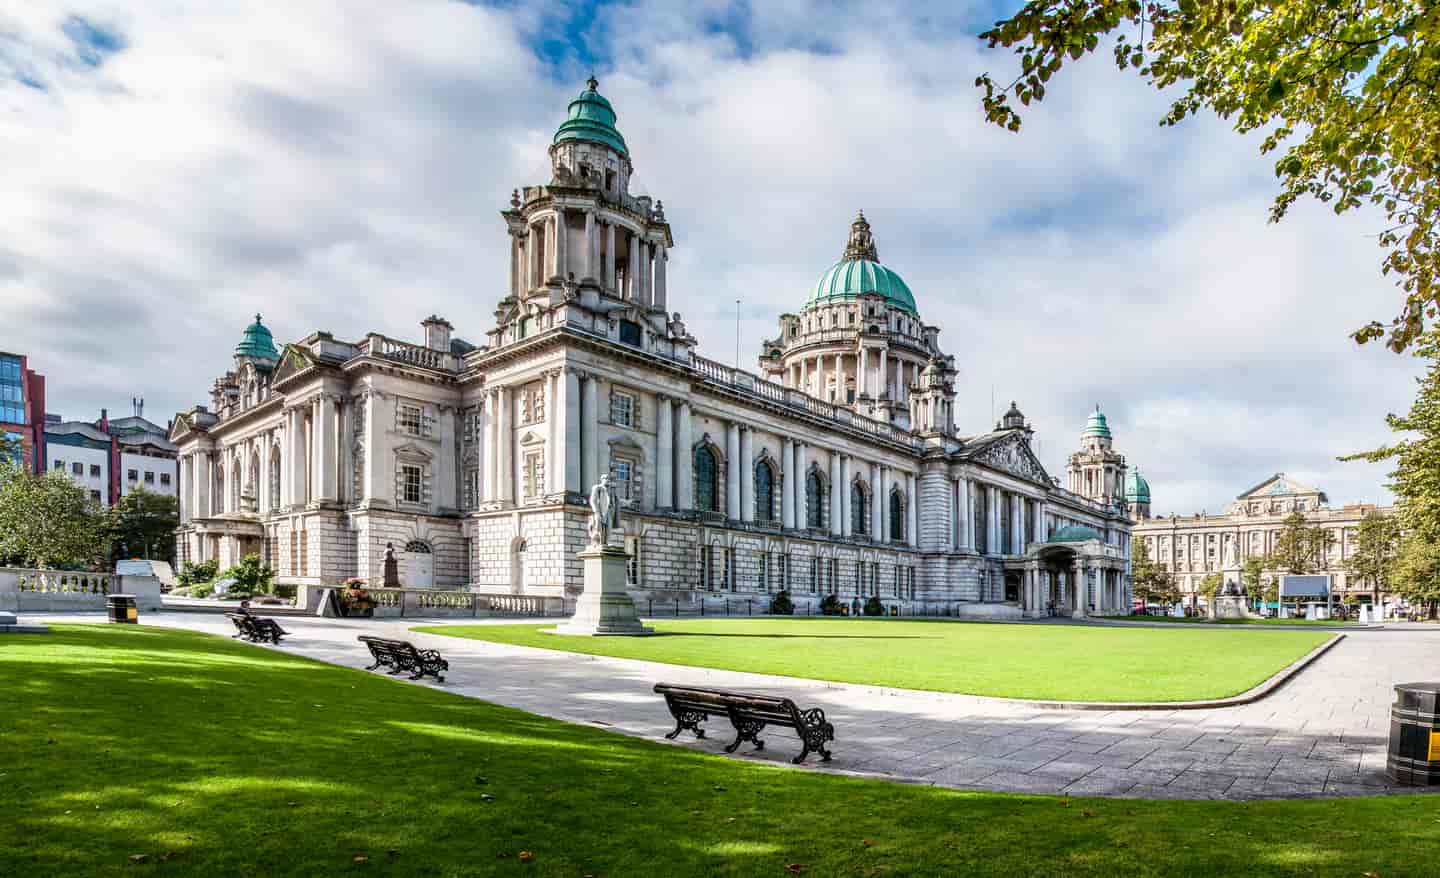 Student Accommodation in Belfast - Belfast City Hall on a cloudy day